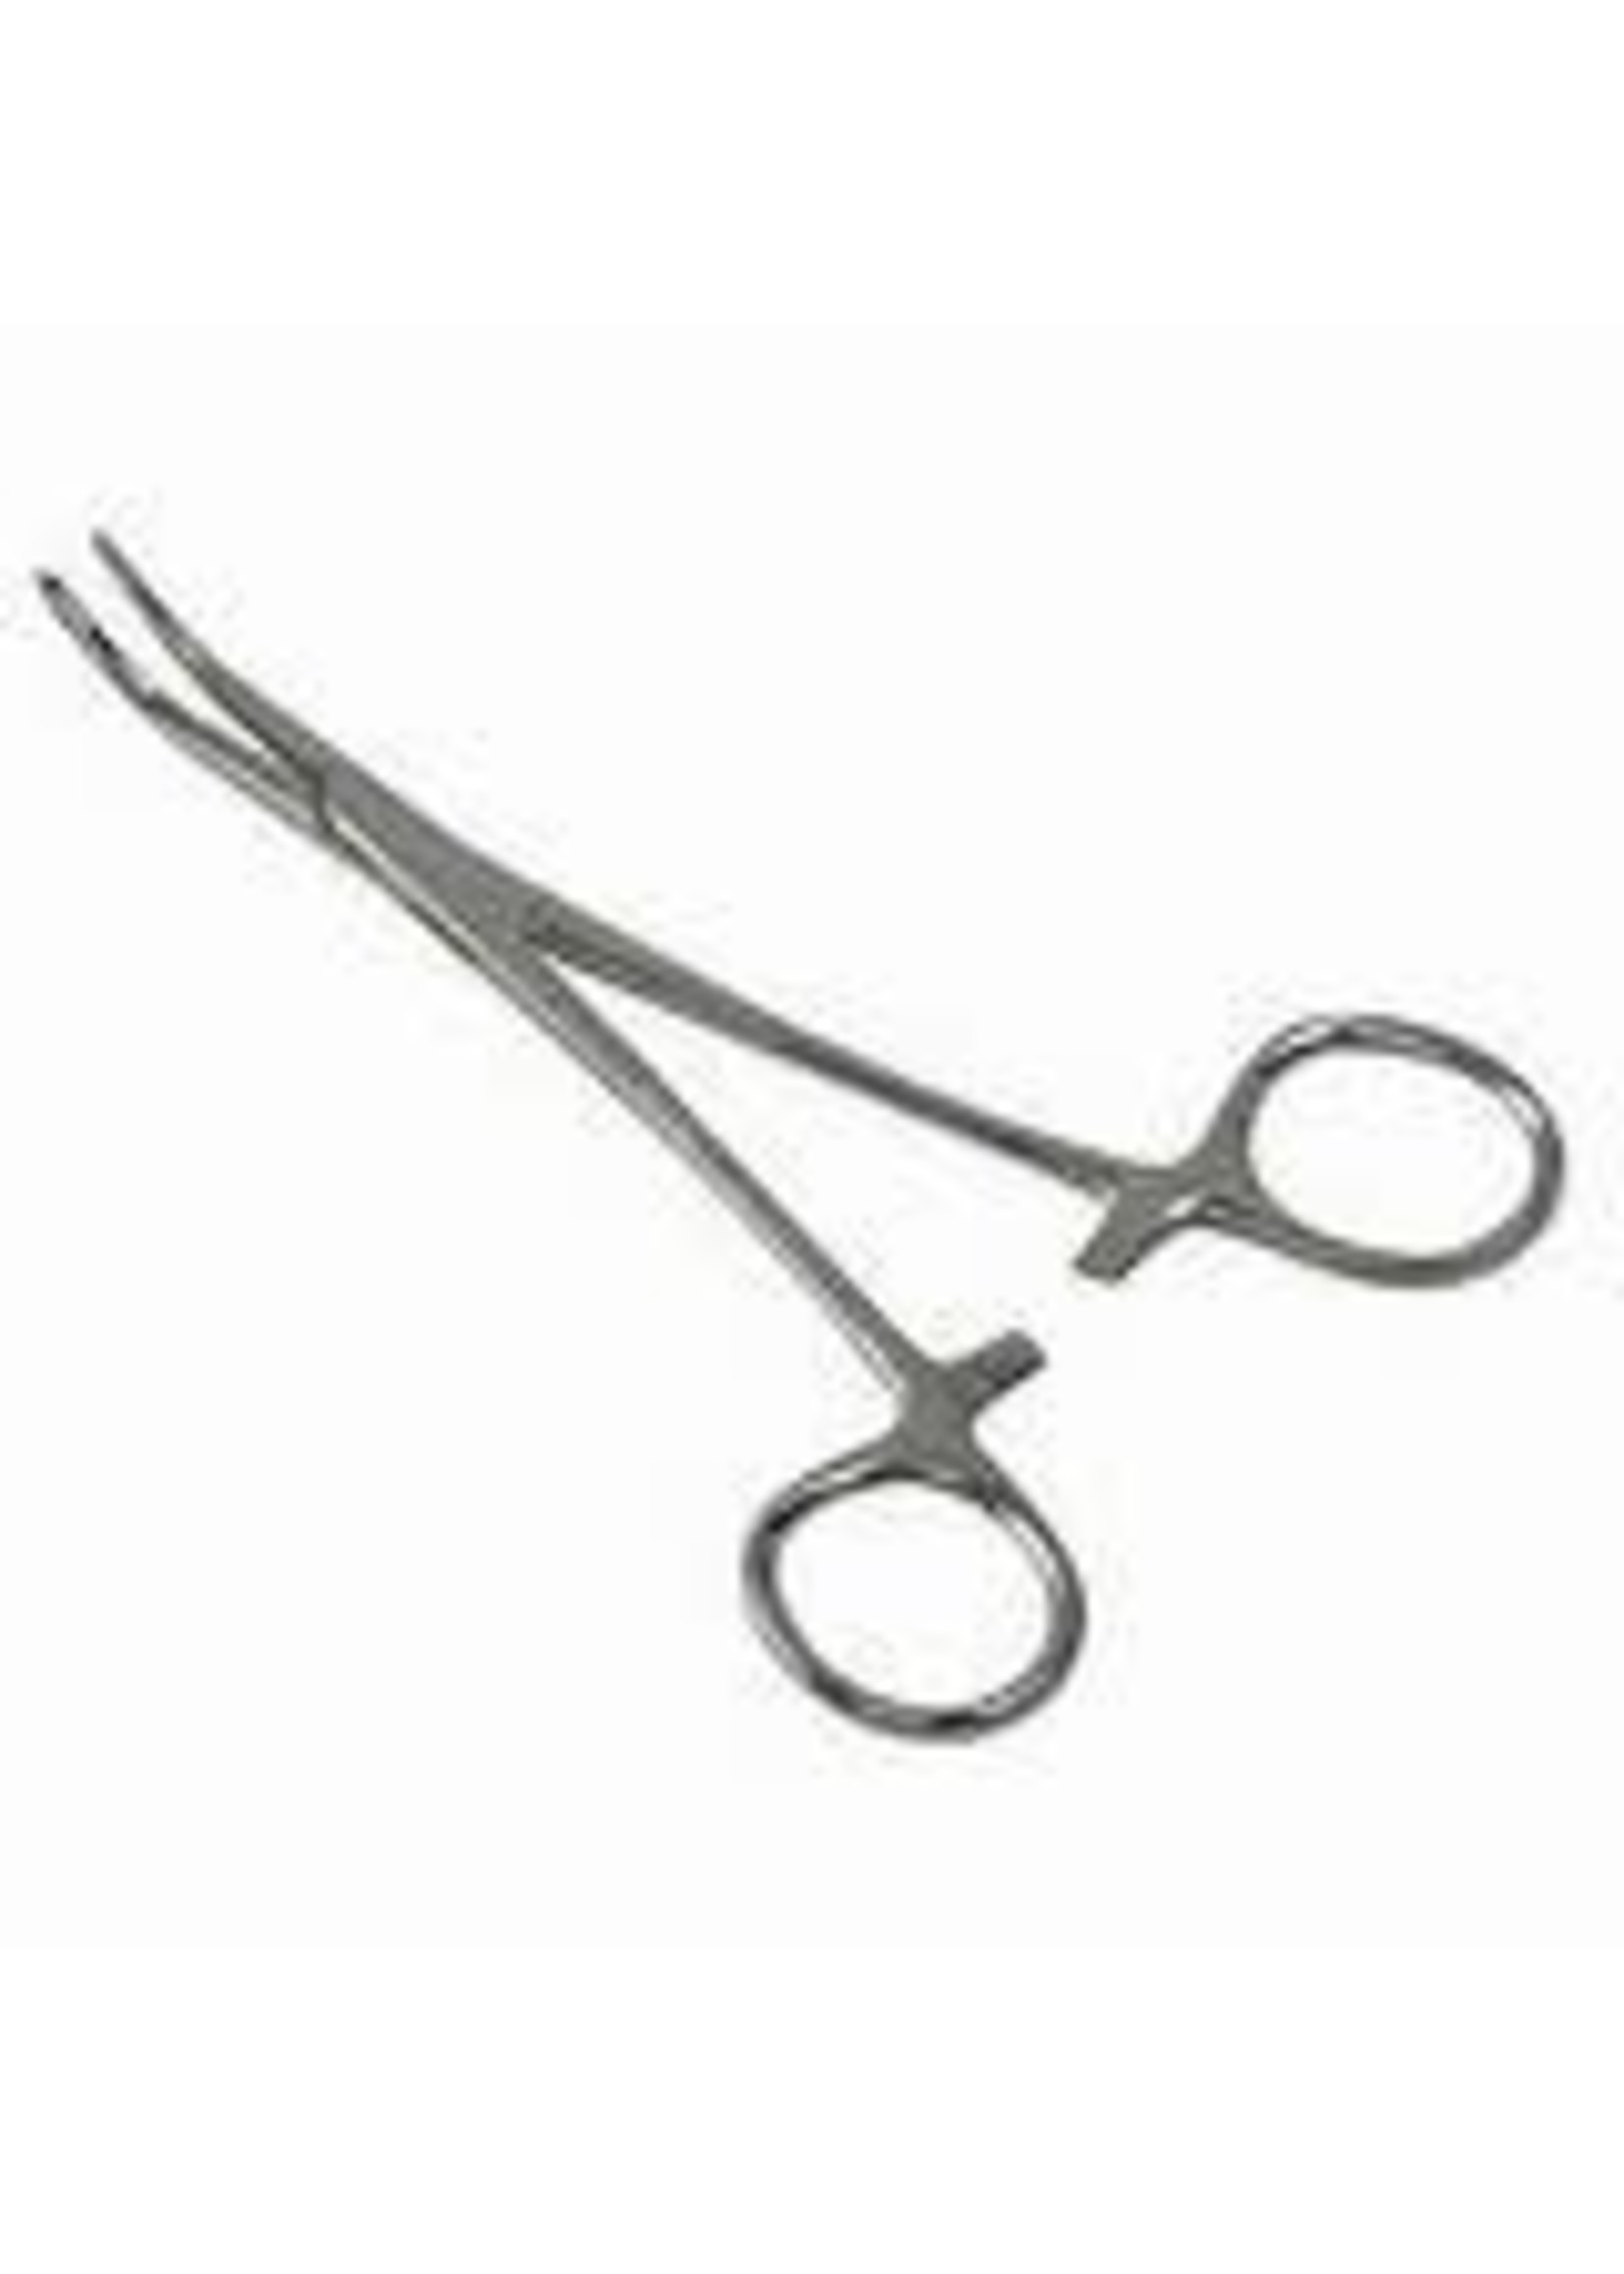 Millers Forge Millers Forge Hemostat Curved 5"